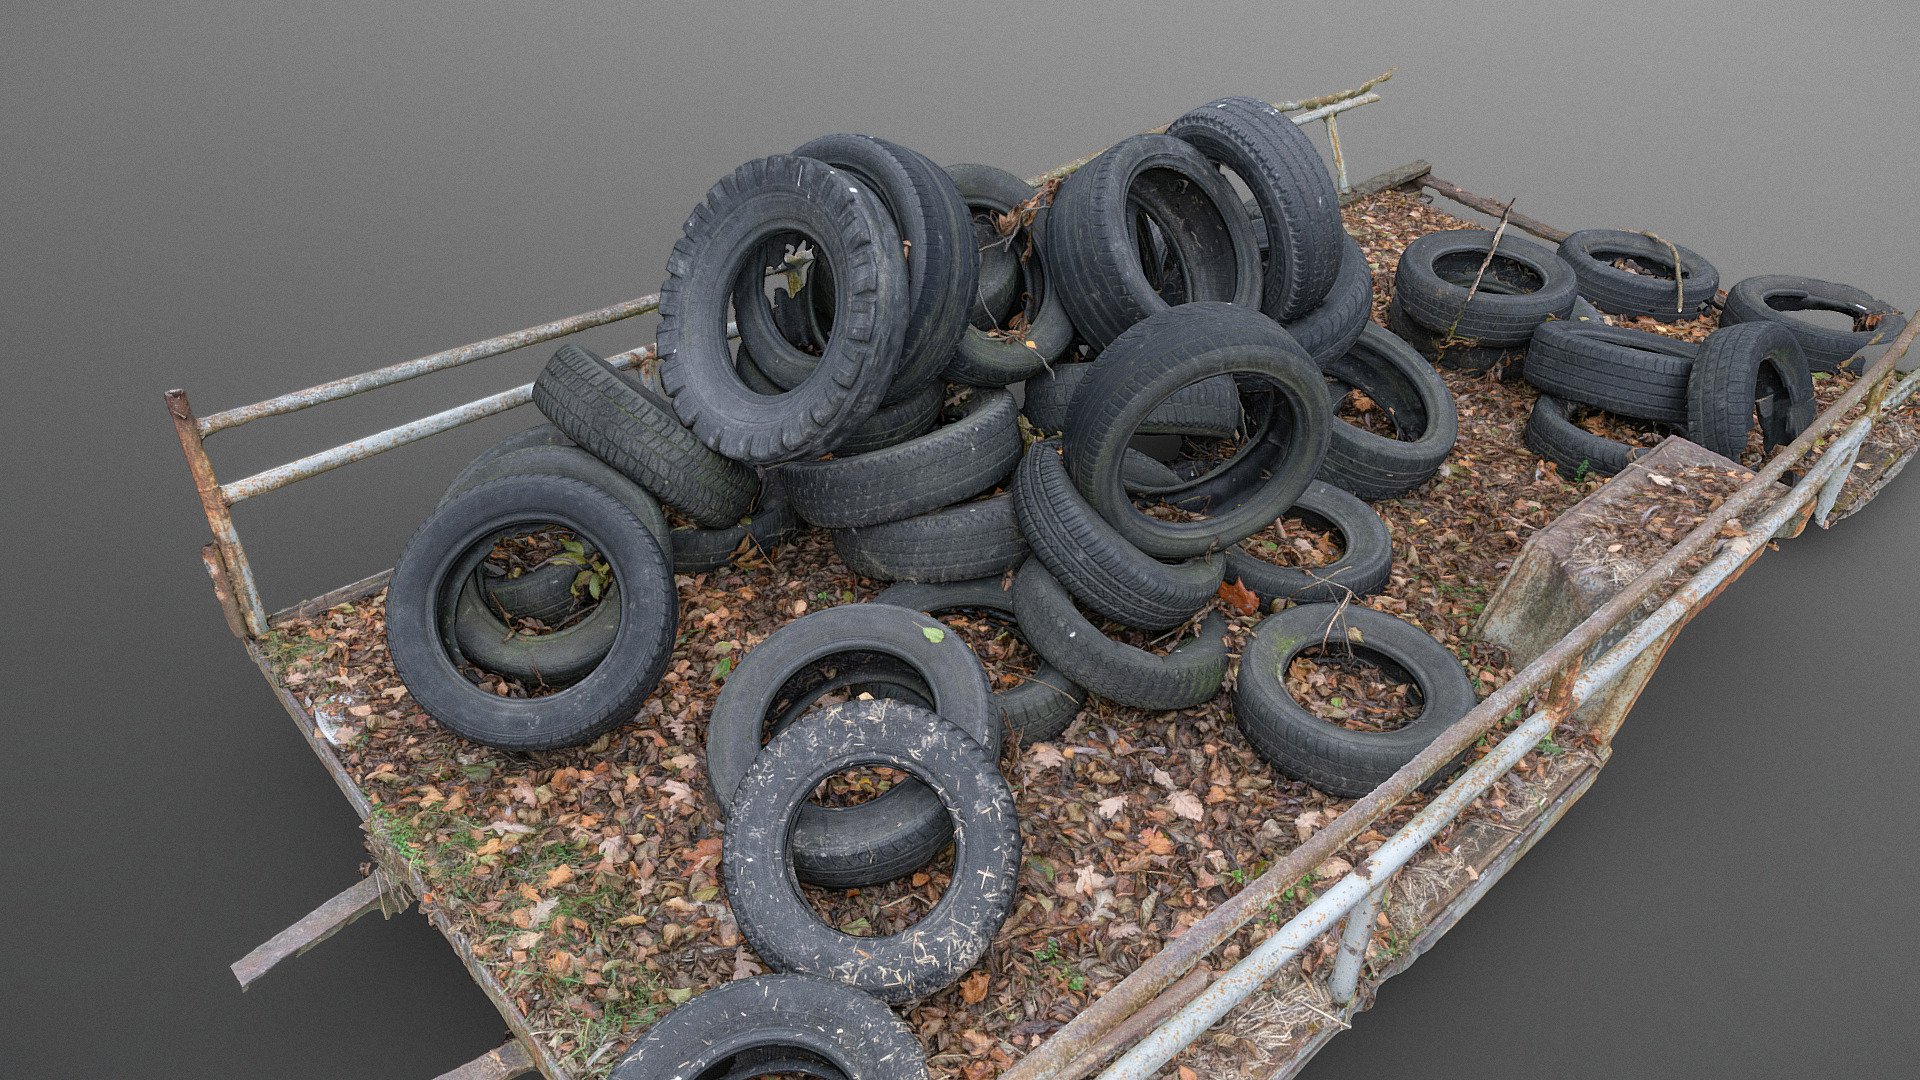 Full hull trunk Truckload of old used vintage car tyres tires wheels heap pile waste with some leaf foliage

photogrammetry scan (220x24mp), 3x8k textures + hd normals - Truckload of tyres - Download Free 3D model by matousekfoto 3d model